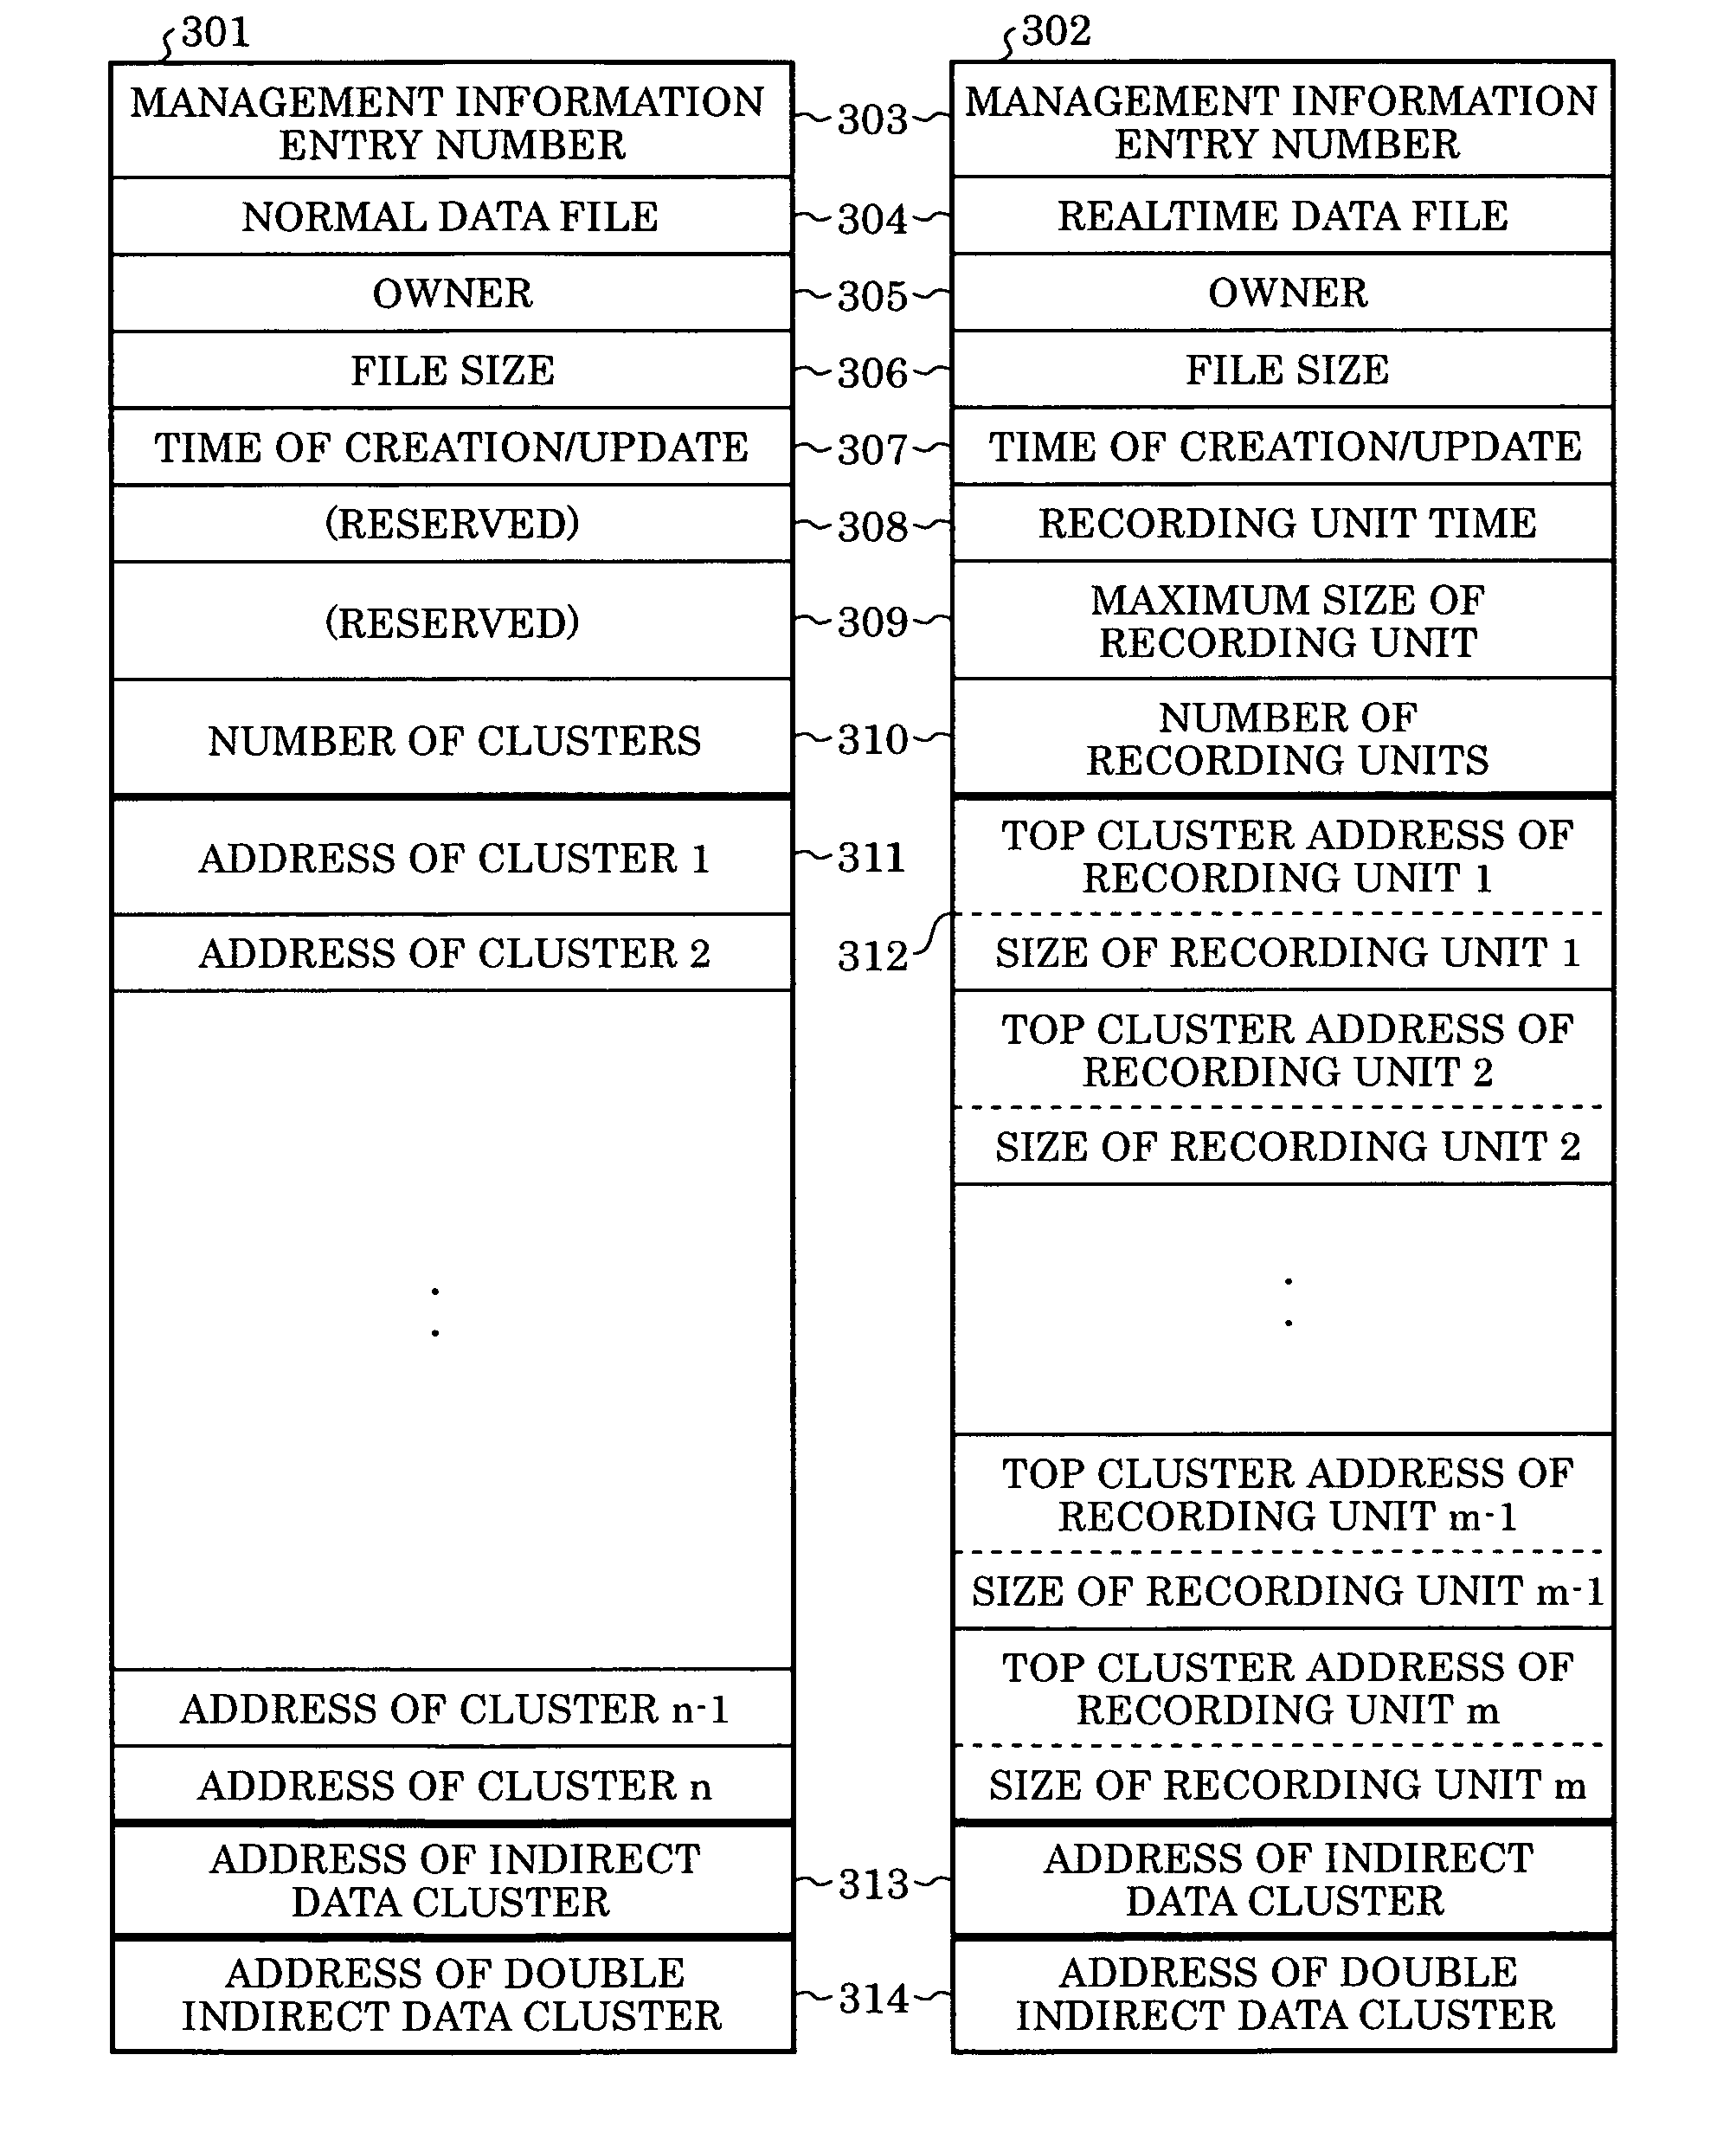 File system, file recording method, and file reading method